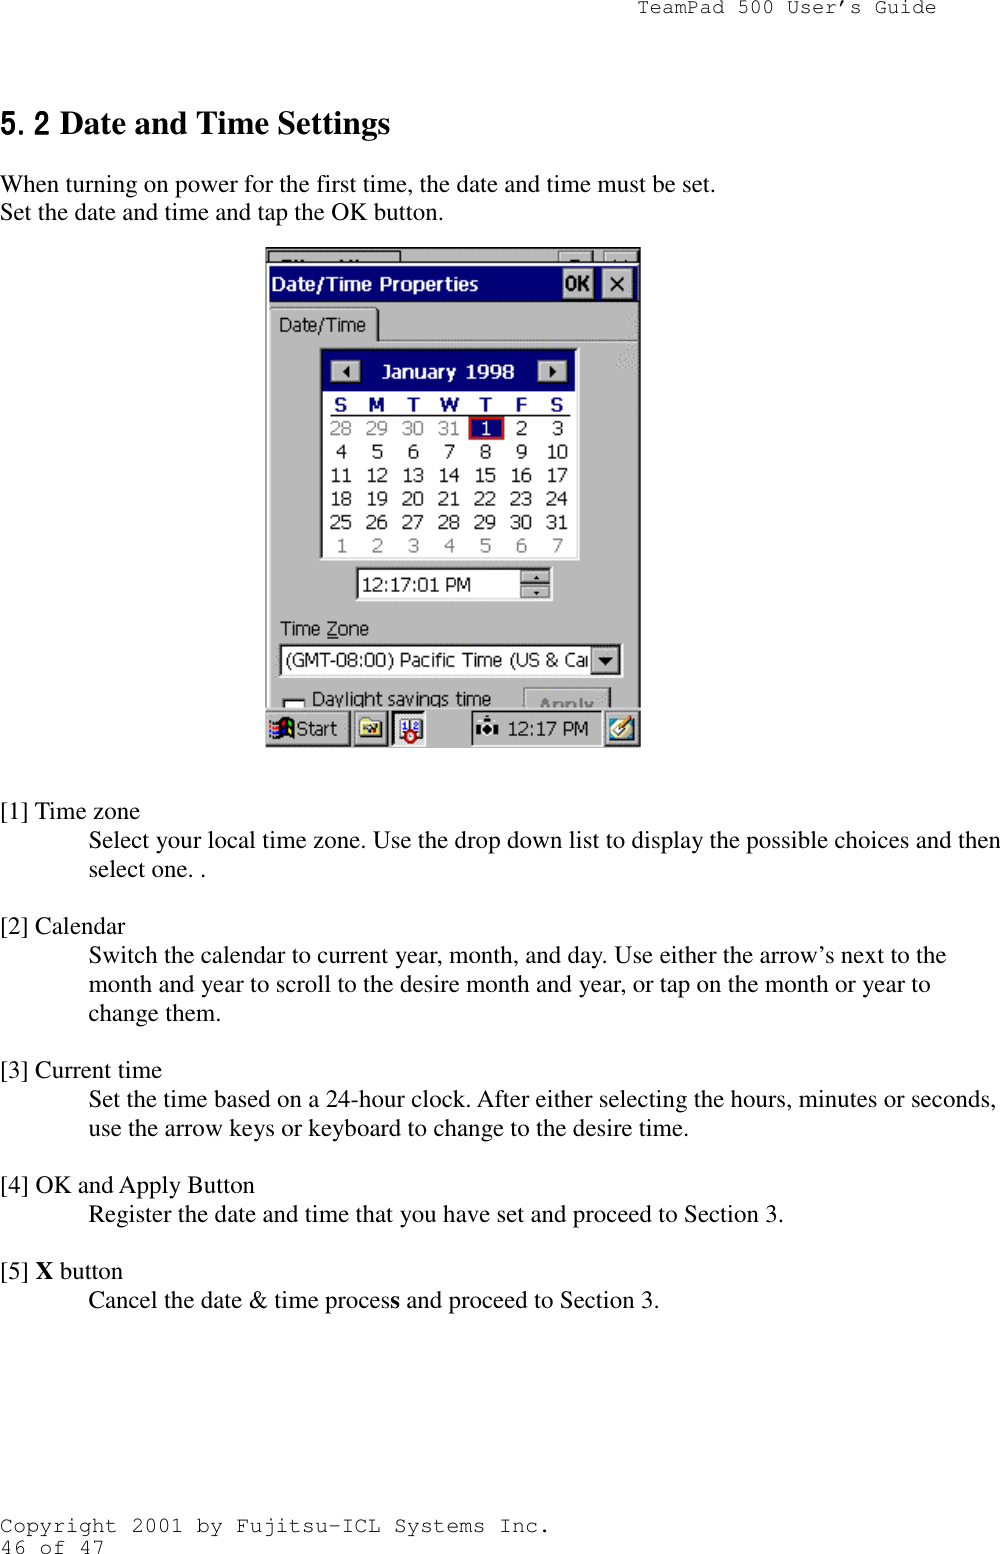                TeamPad 500 User’s GuideCopyright 2001 by Fujitsu-ICL Systems Inc.46 of 475.25.25.25.2 Date and Time SettingsWhen turning on power for the first time, the date and time must be set.Set the date and time and tap the OK button.         [1] Time zoneSelect your local time zone. Use the drop down list to display the possible choices and thenselect one. .[2] CalendarSwitch the calendar to current year, month, and day. Use either the arrow’s next to themonth and year to scroll to the desire month and year, or tap on the month or year tochange them.[3] Current timeSet the time based on a 24-hour clock. After either selecting the hours, minutes or seconds,use the arrow keys or keyboard to change to the desire time.[4] OK and Apply ButtonRegister the date and time that you have set and proceed to Section 3.[5] X buttonCancel the date &amp; time process and proceed to Section 3.